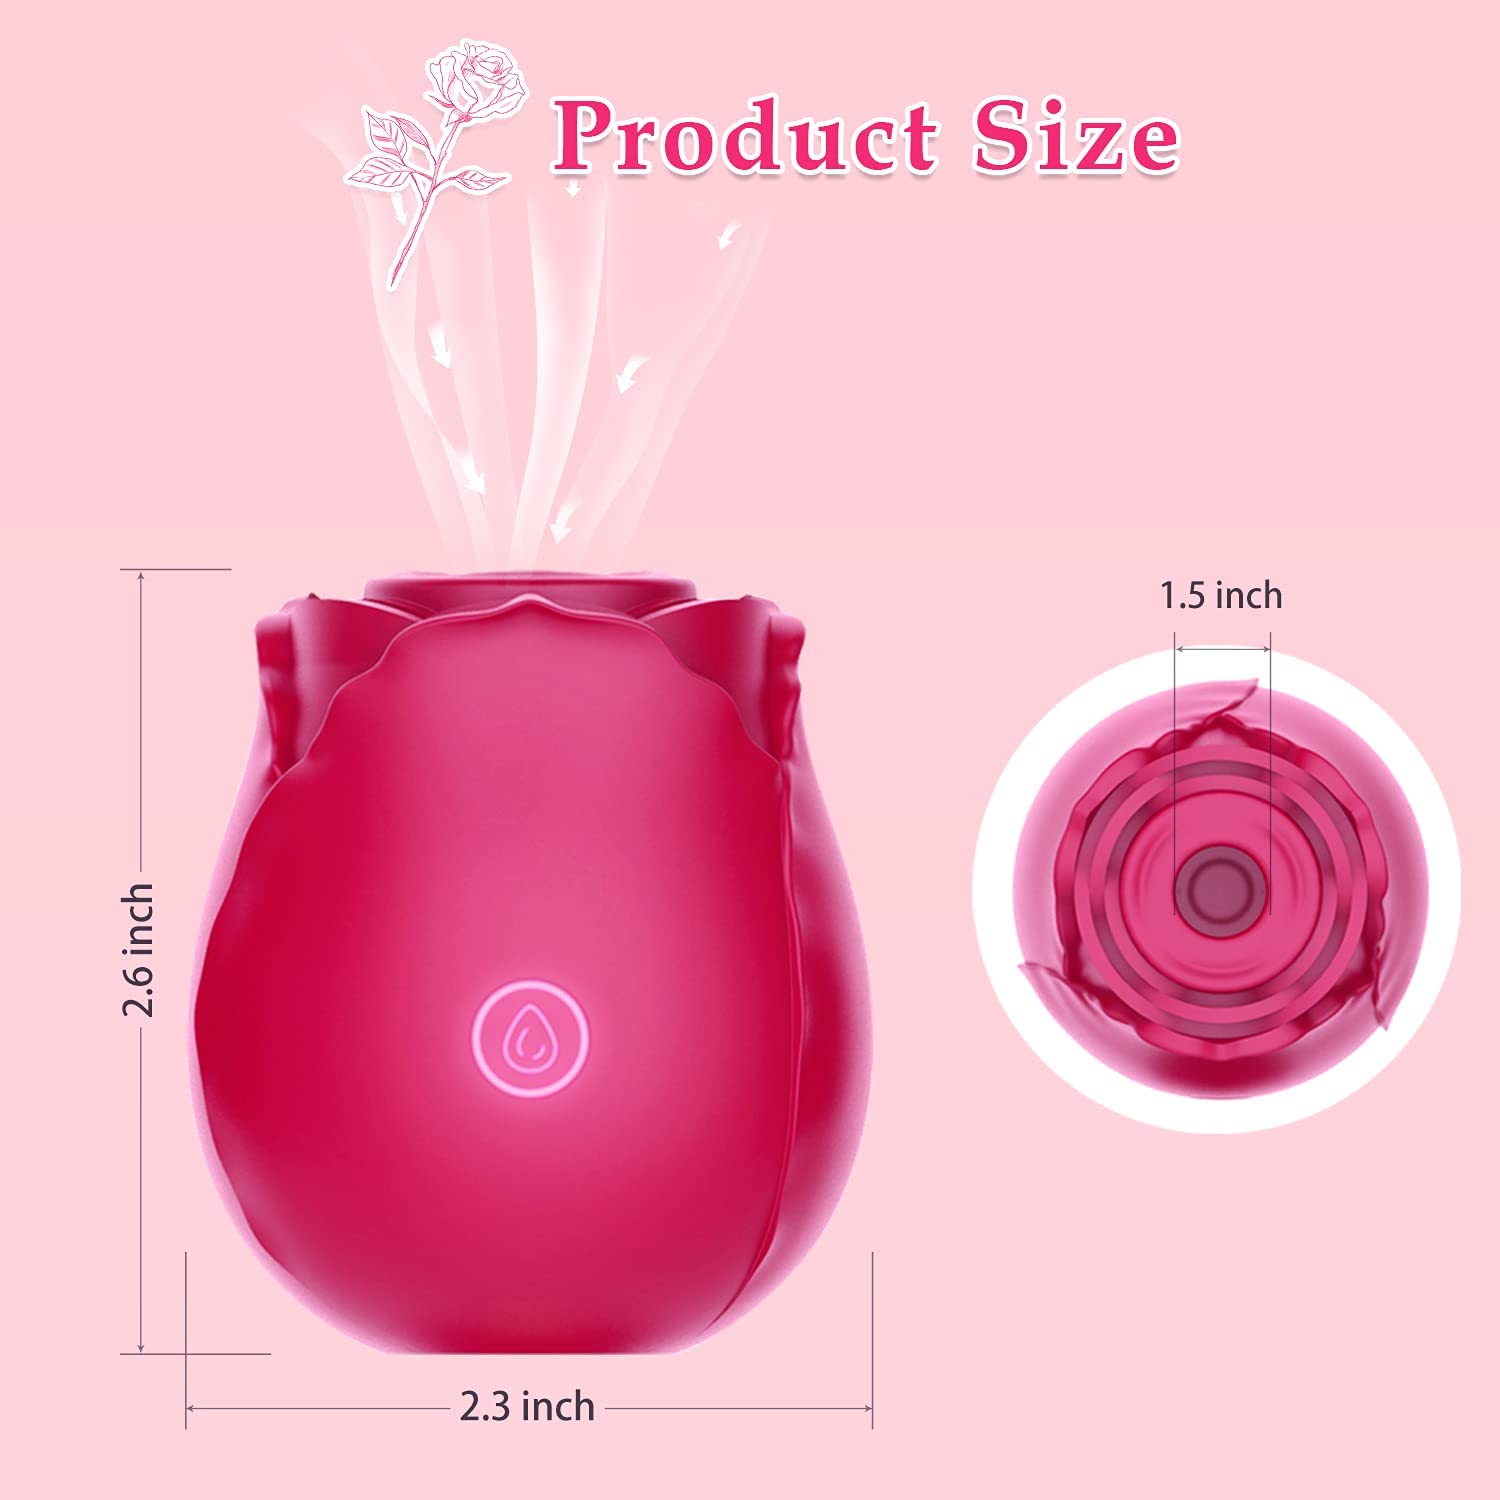 Rose Toys, Clitoral Vibrator with 10 Mind-Blowing Suction Mode, Rechargeable Clitoris Stimulating Sucking Vibrator Clit Sucker Nipple Stimulator Sex Toys for Women, Oral Sex Rose Vibrator - Red